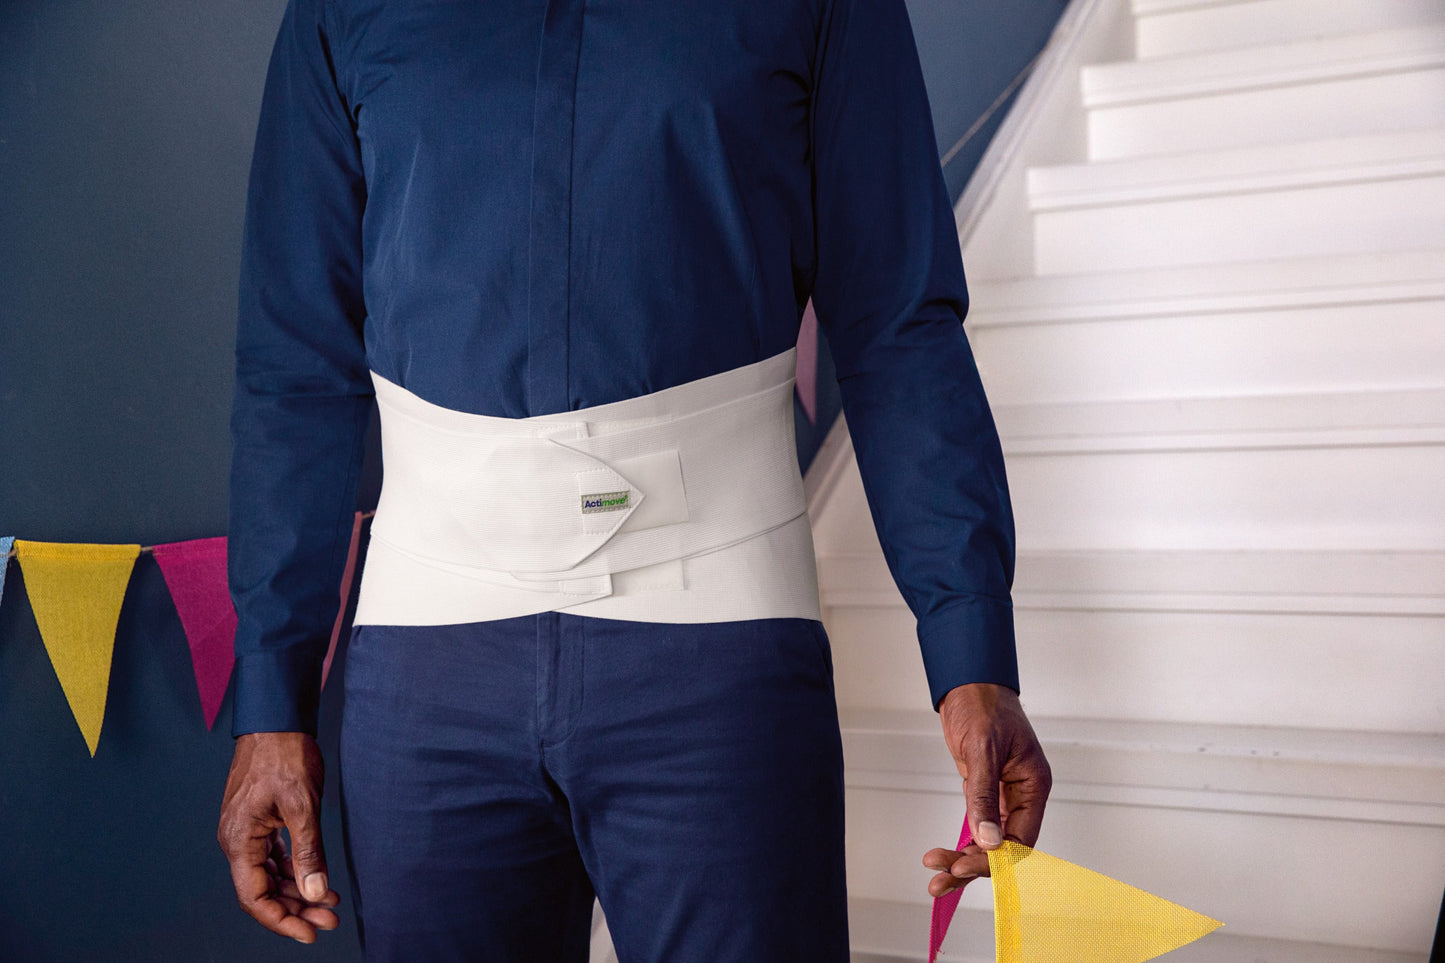 Jobst Actimove Professional Line Lumbar Sacral Support Comfort with Additional Support Belt